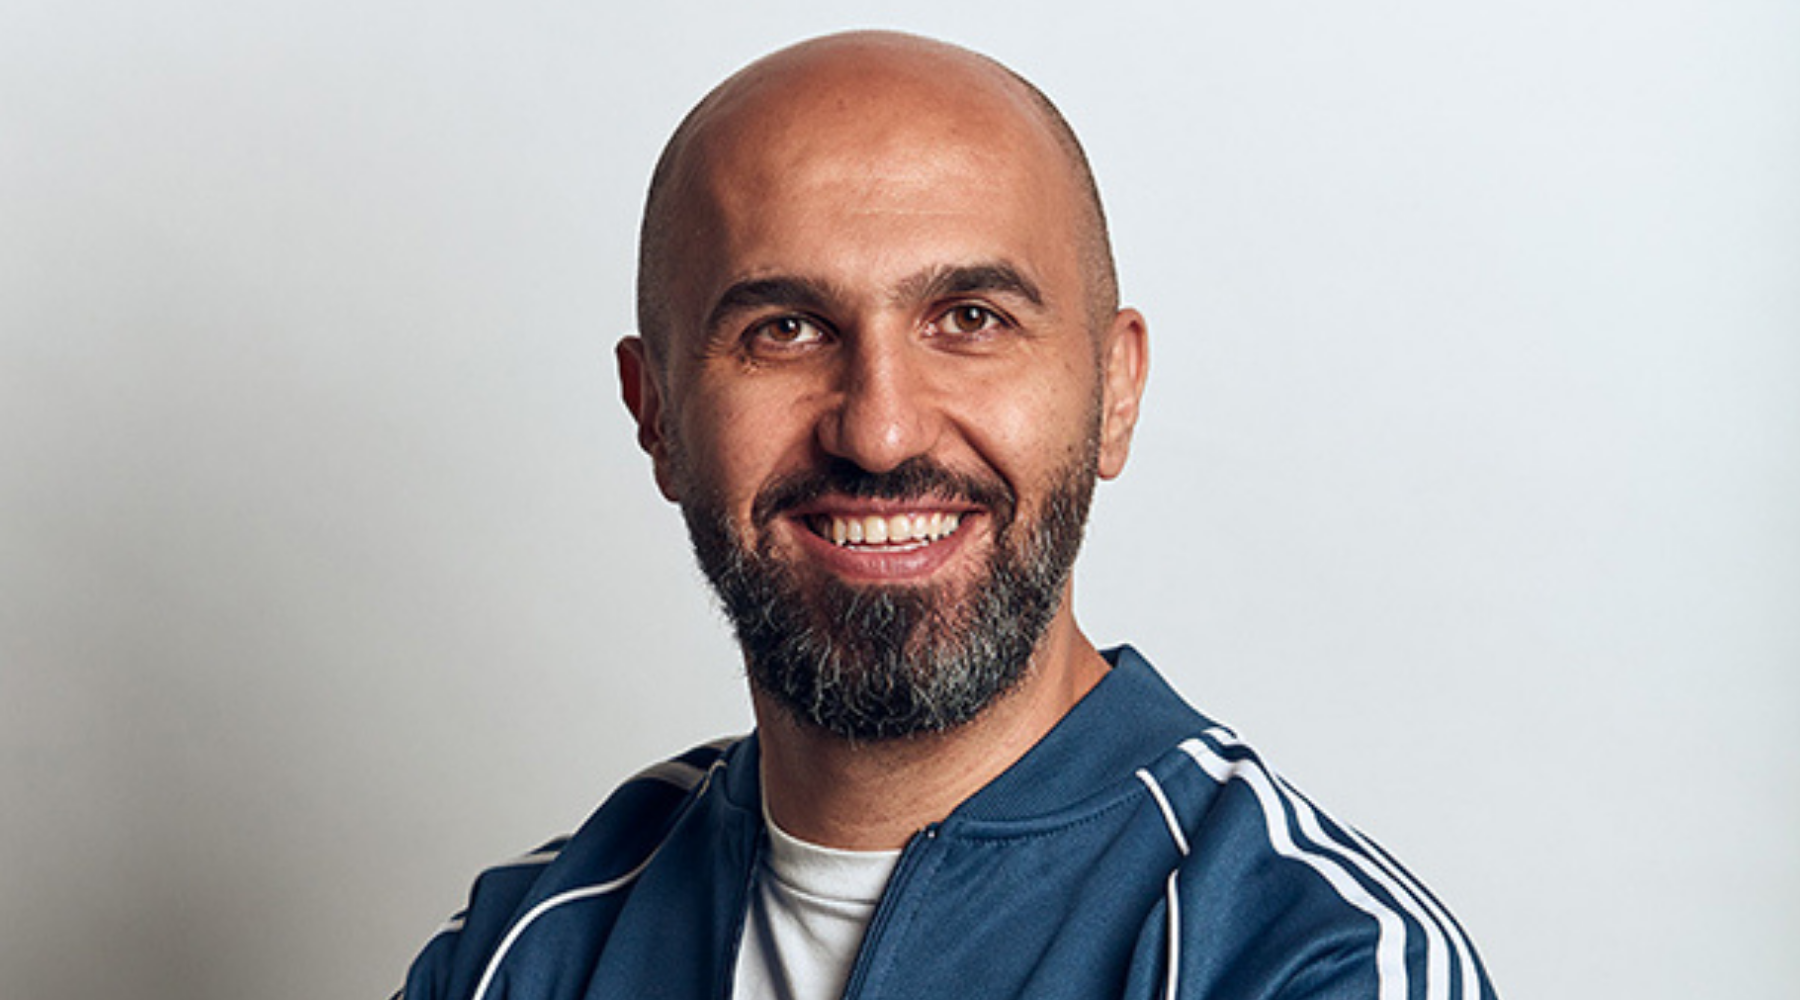 Adidas Appoints New Leadership for MENA Region